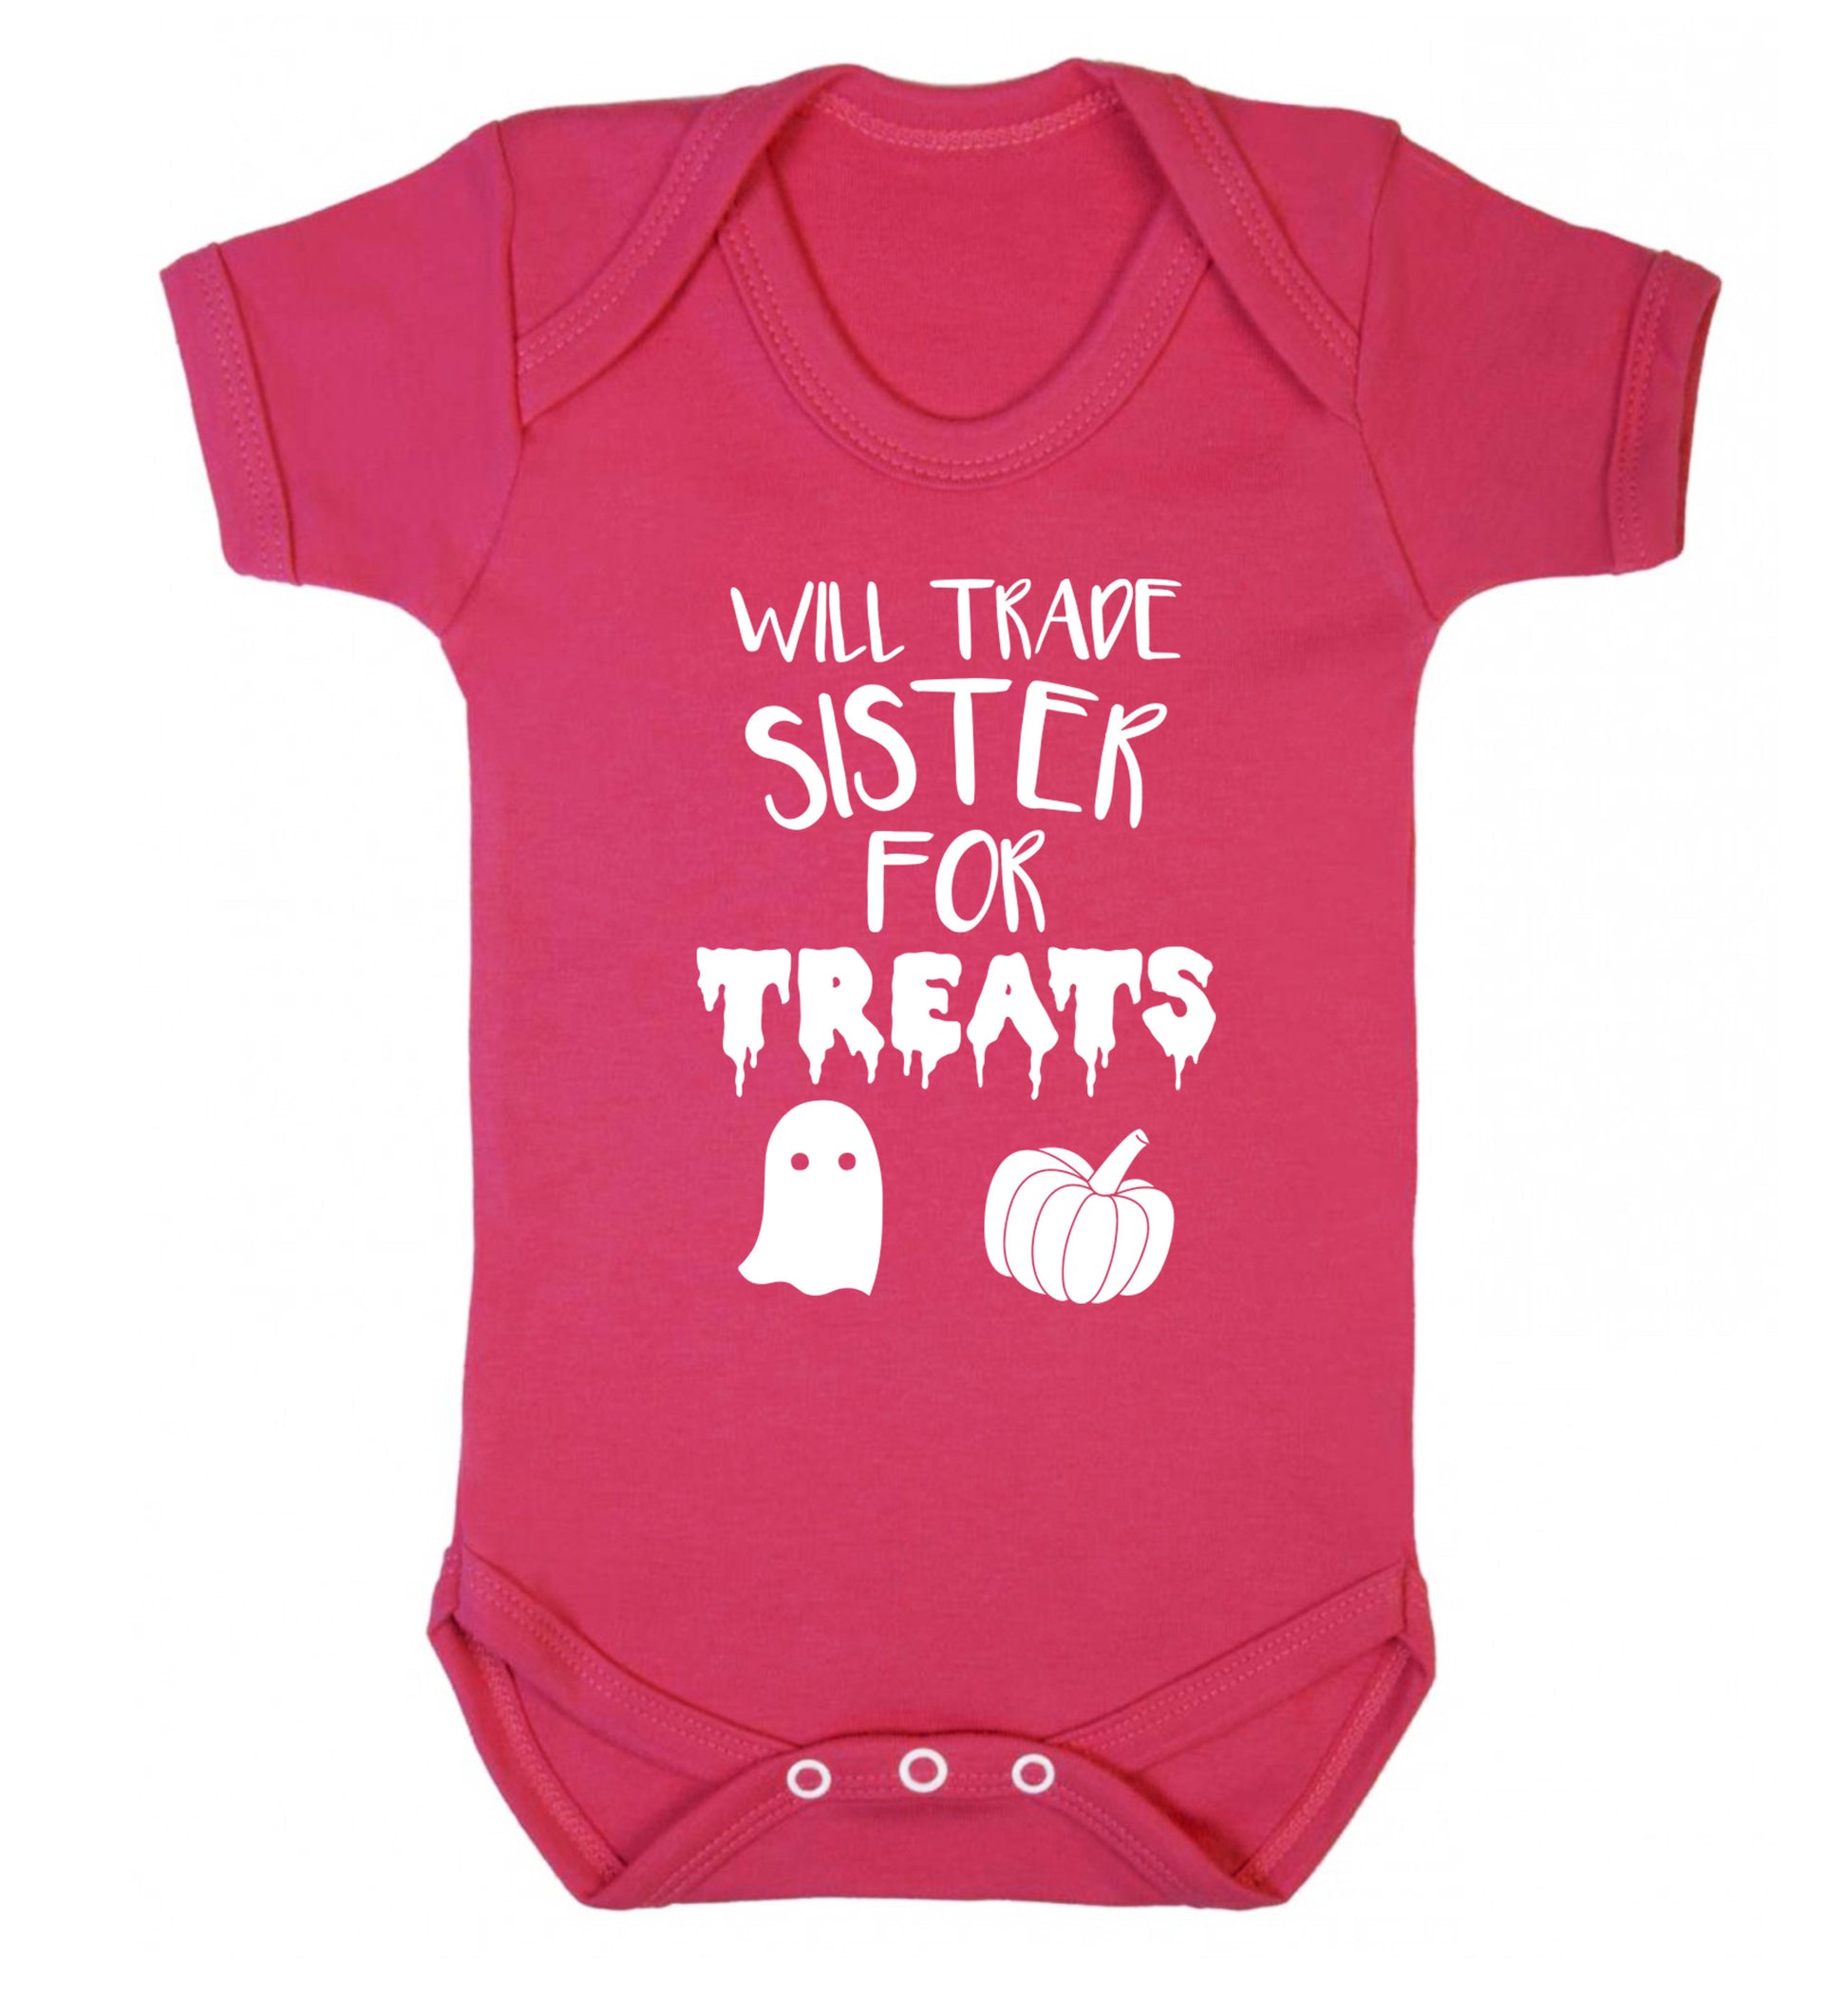 Will trade sister for treats Baby Vest dark pink 18-24 months